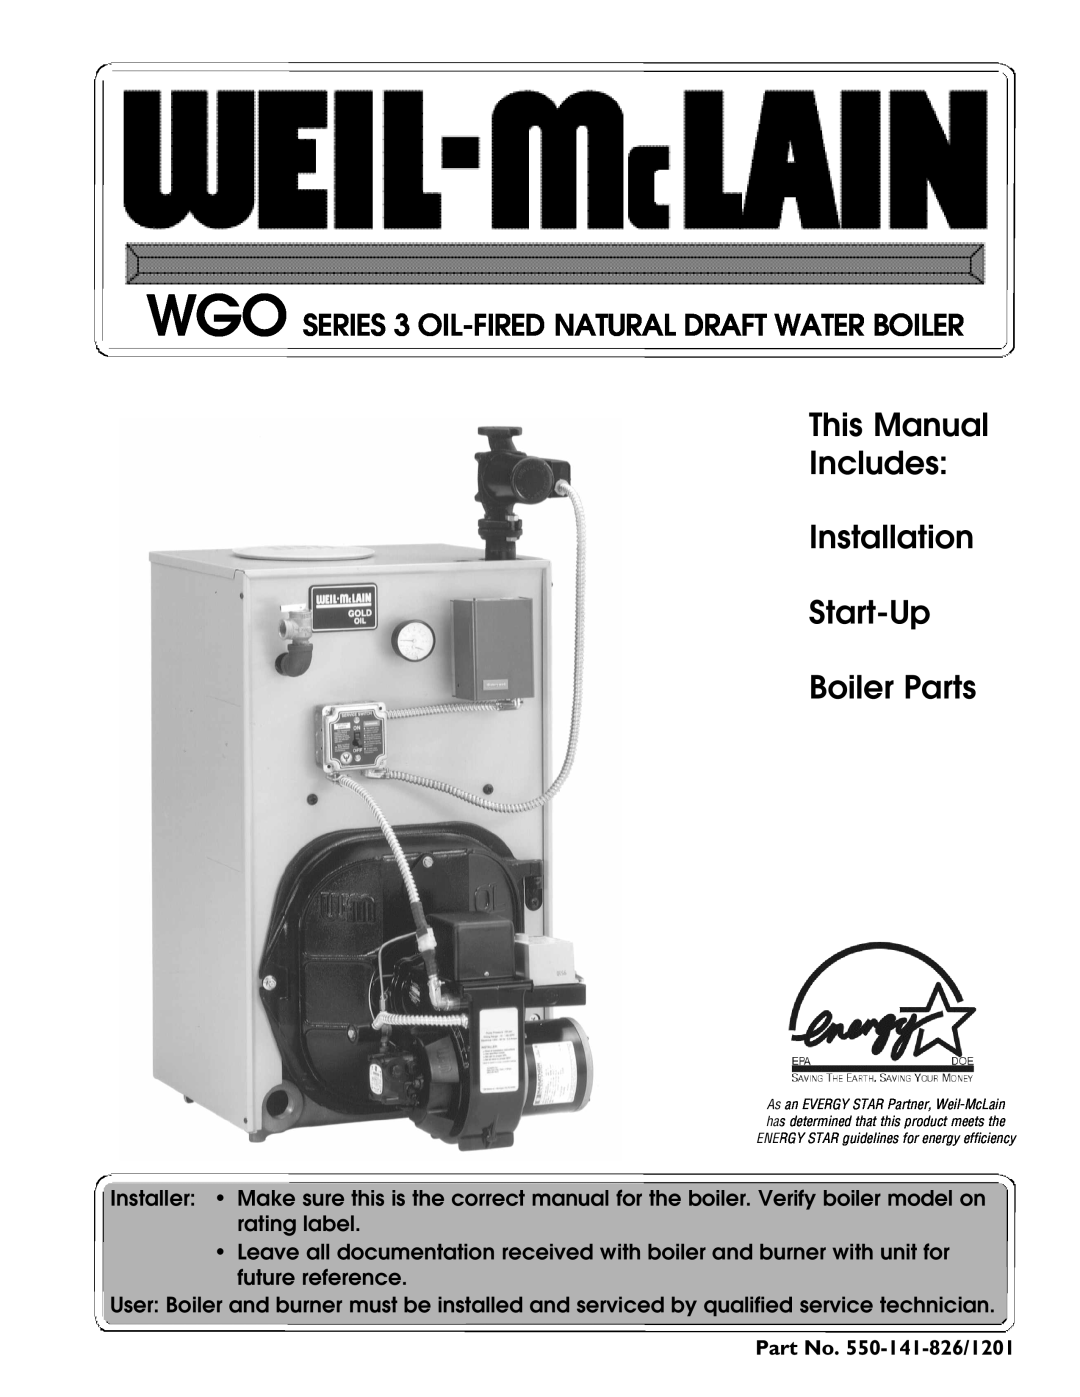 Weil-McLain manual This Manual Includes Installation Start-Up, Boiler Parts, Part No. 550-141-826/1201 